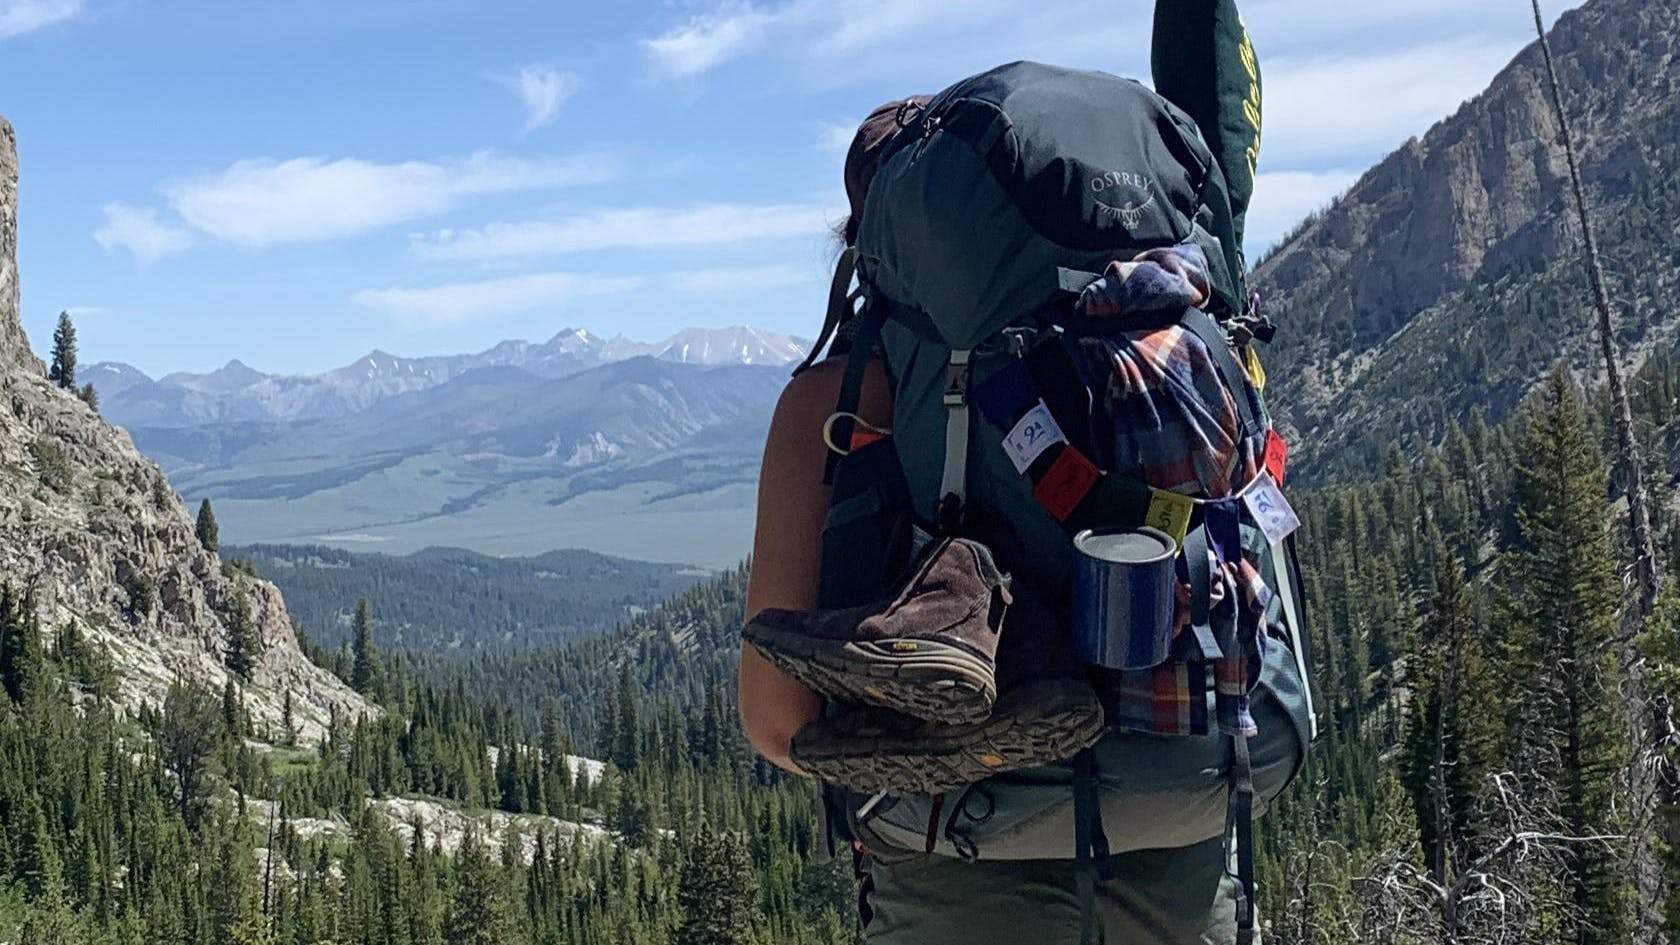 A woman with the Osprey Ariel 75 L backpacking backpack stands at the top of a lookout. There are mountains and rocky cliffs in the distance and attached to her pack are some shoes, a cup, and other camping equiptment.